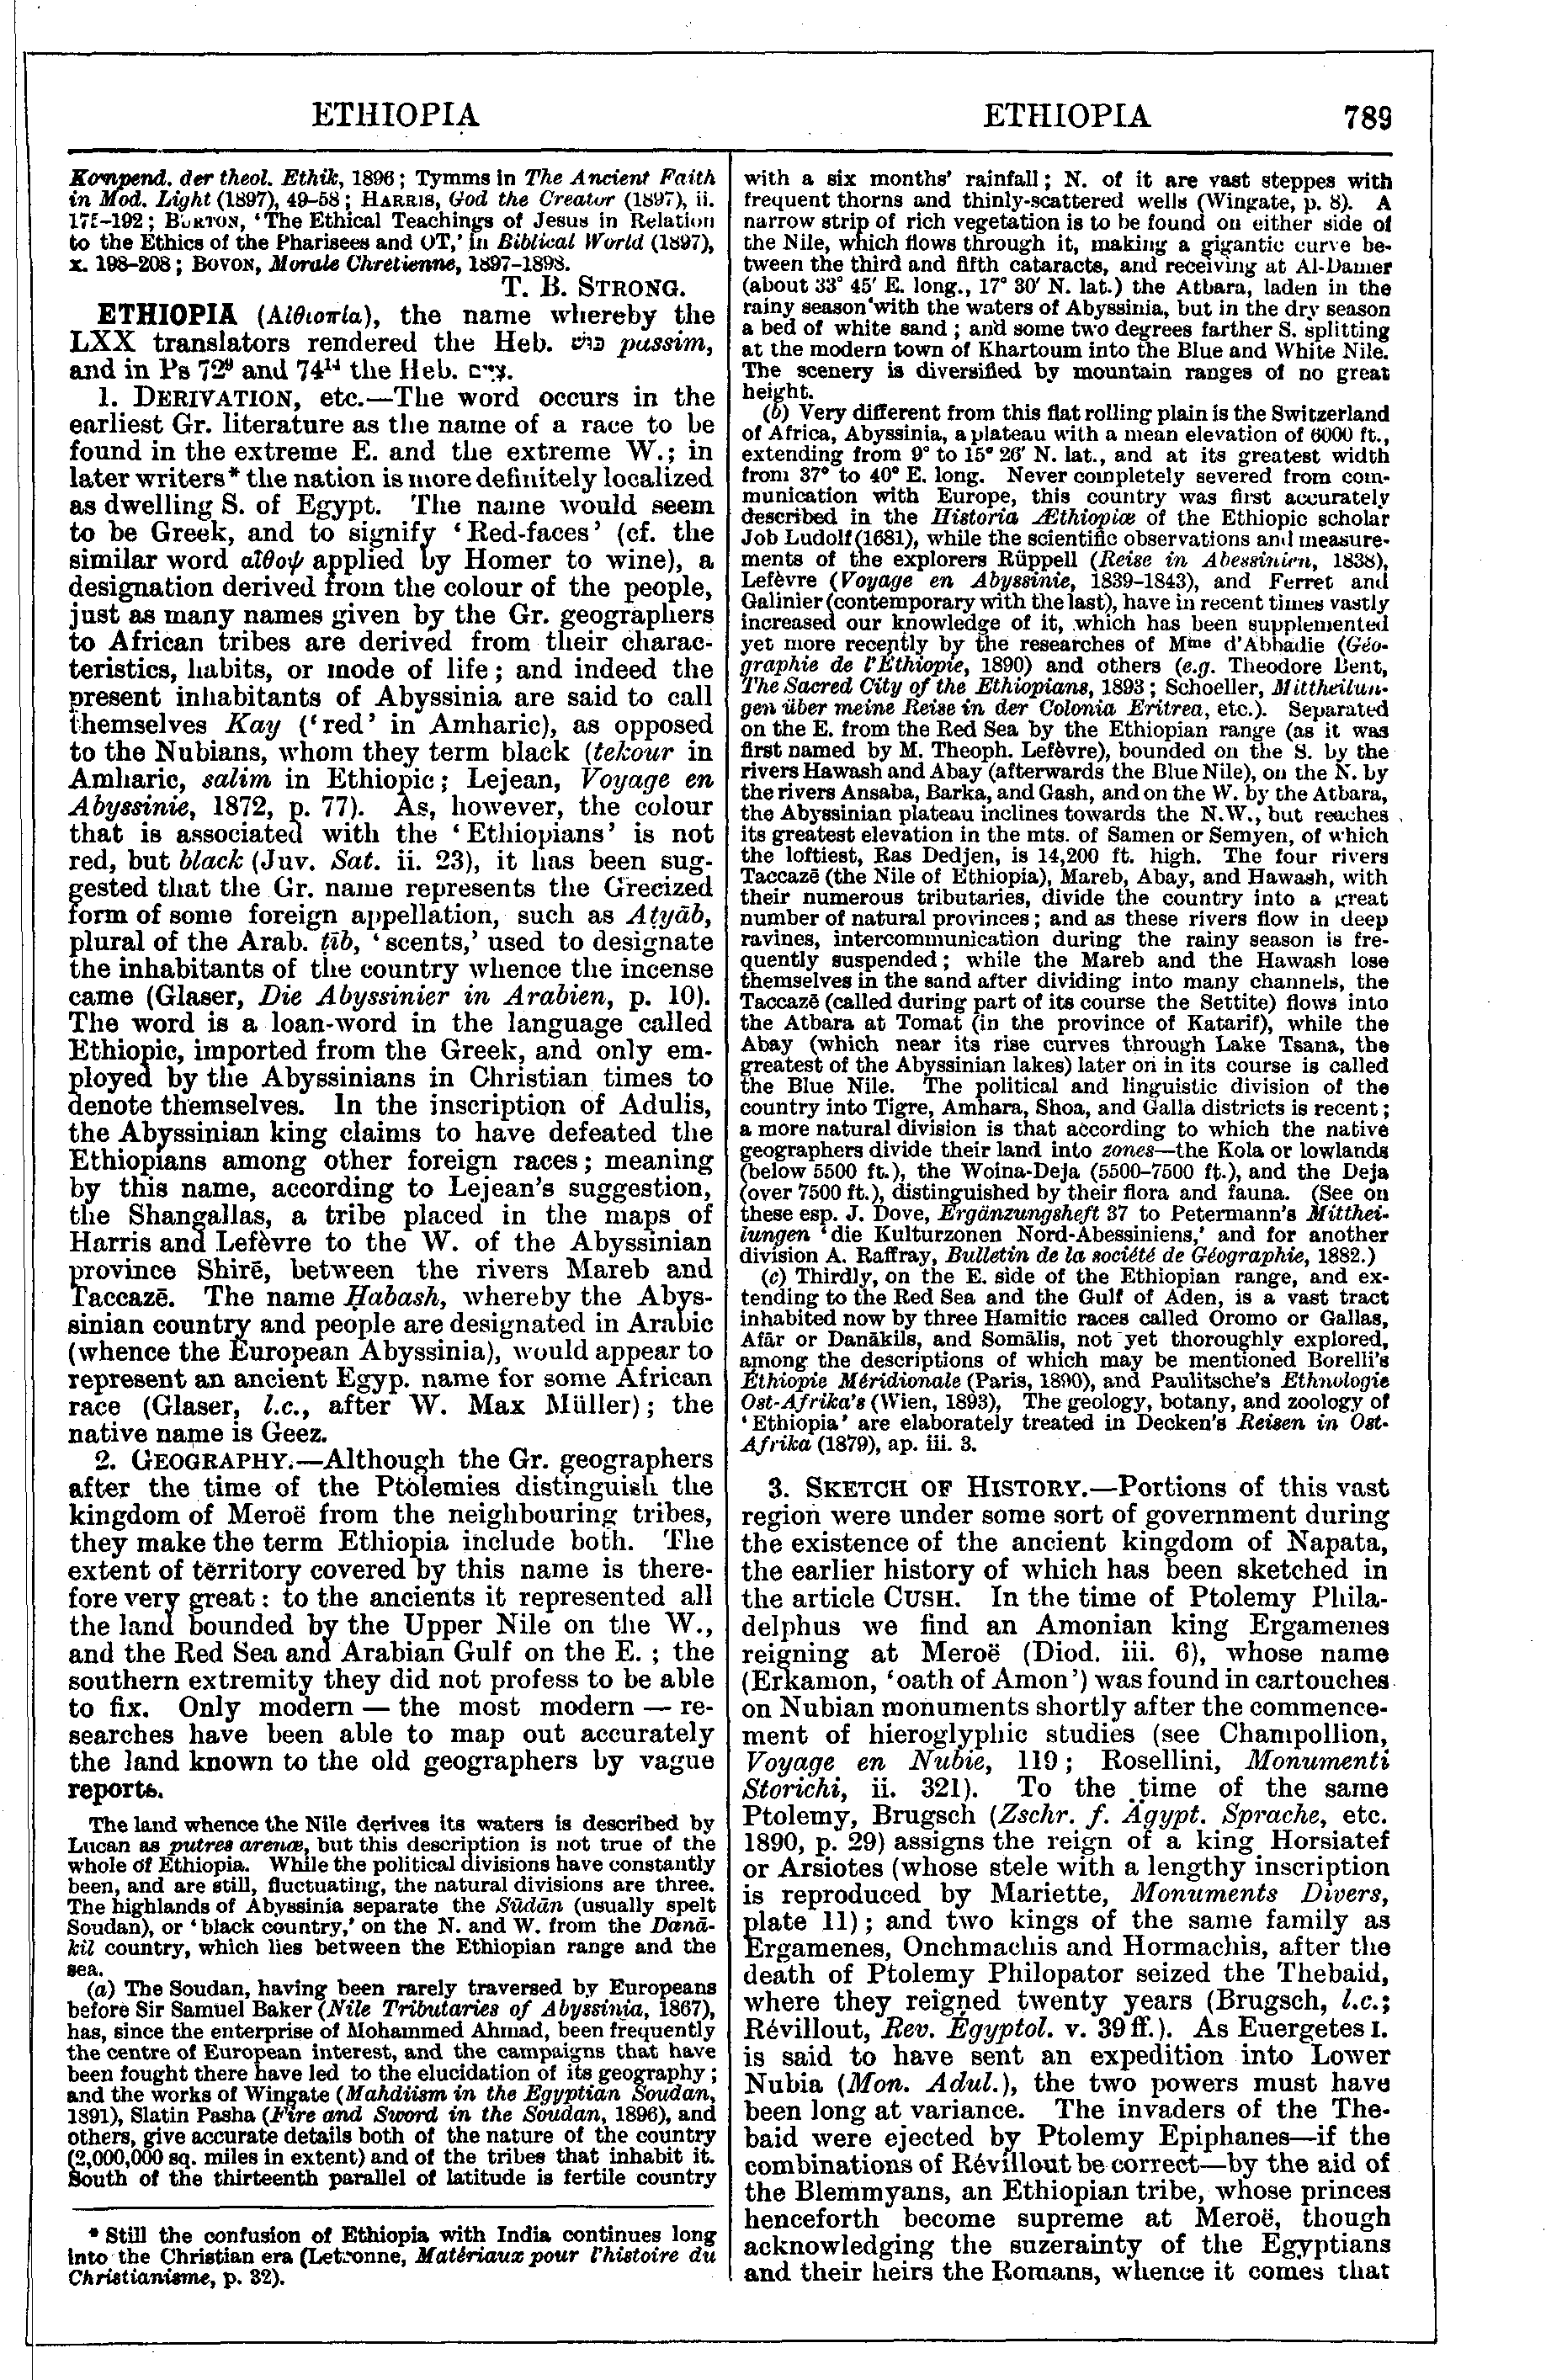 Image of page 789